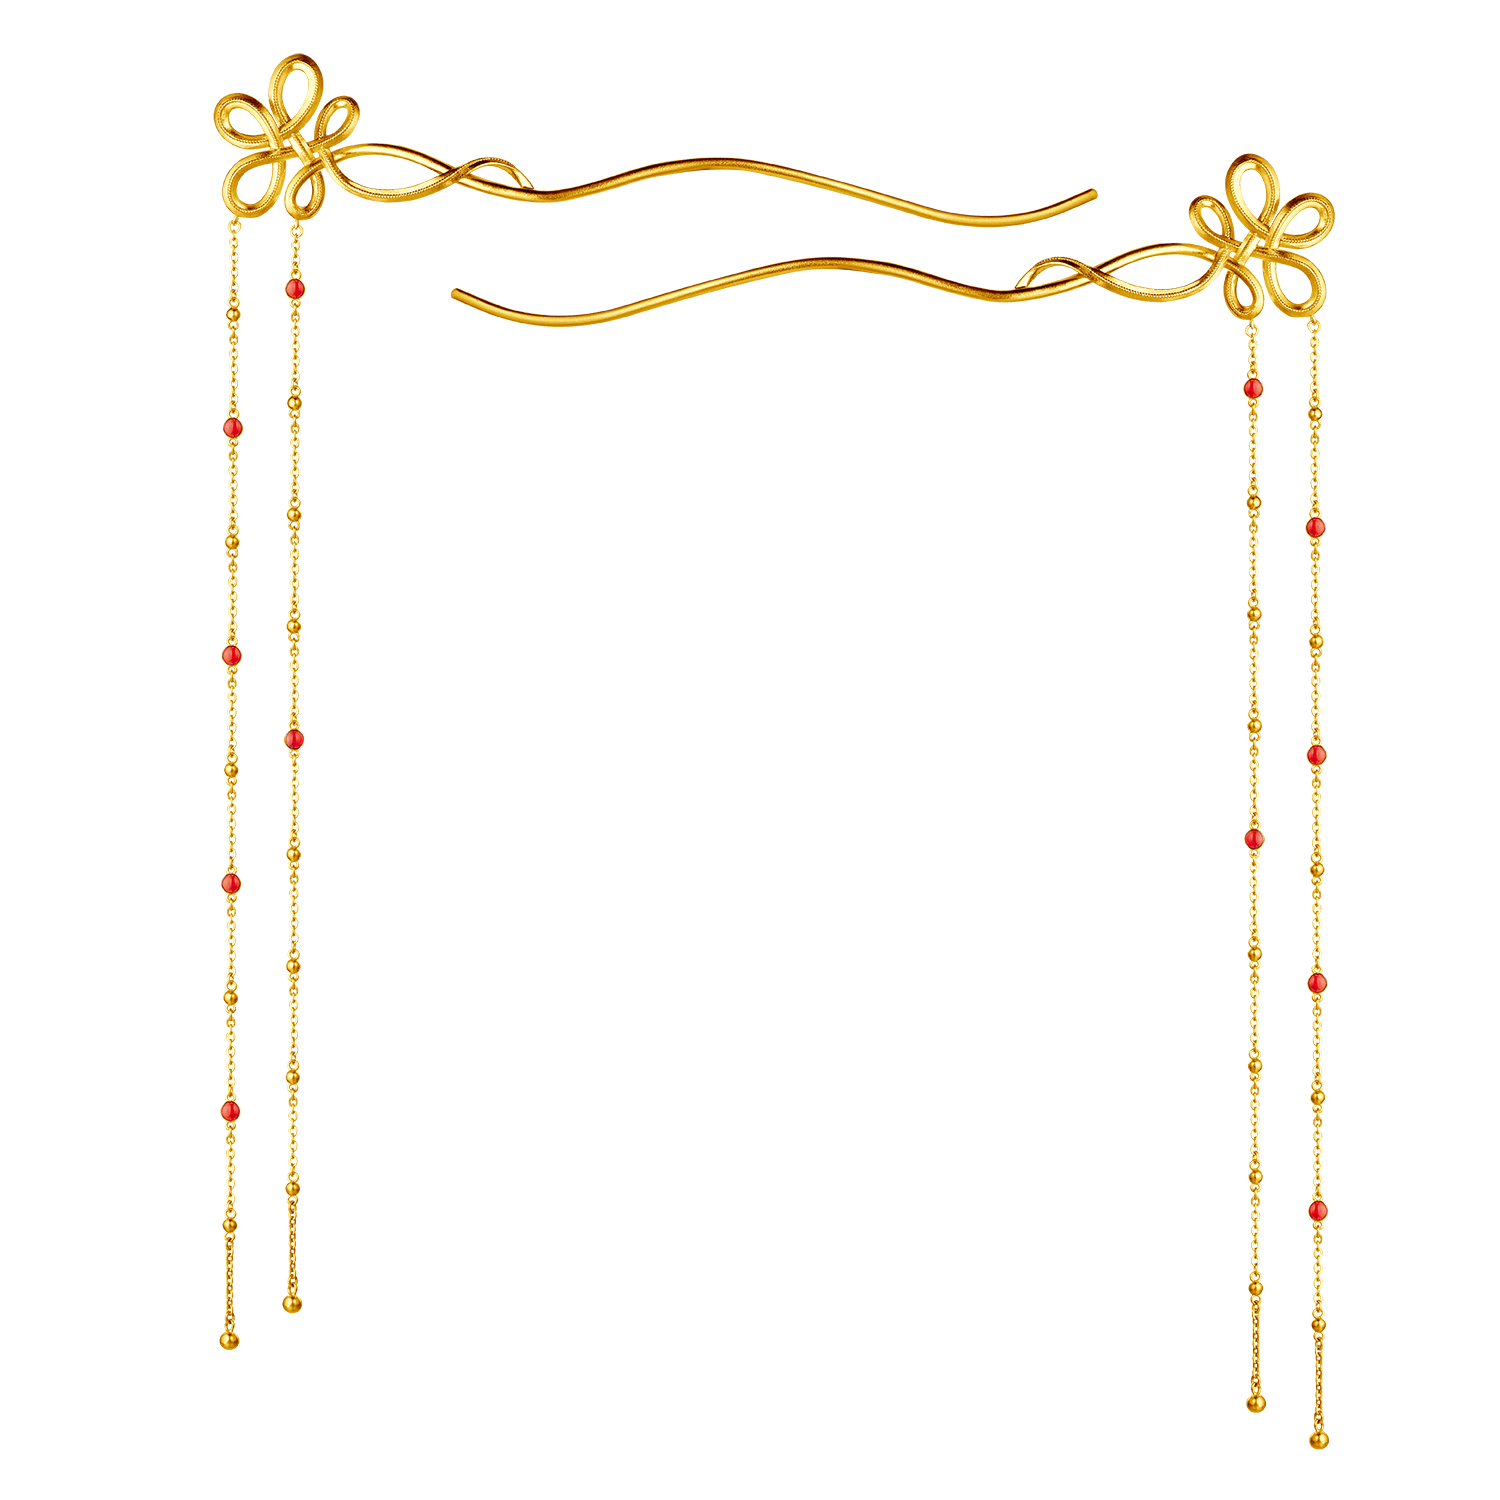 Heirloom Fortune Collection "Tie the Knot" Gold Hairpin 